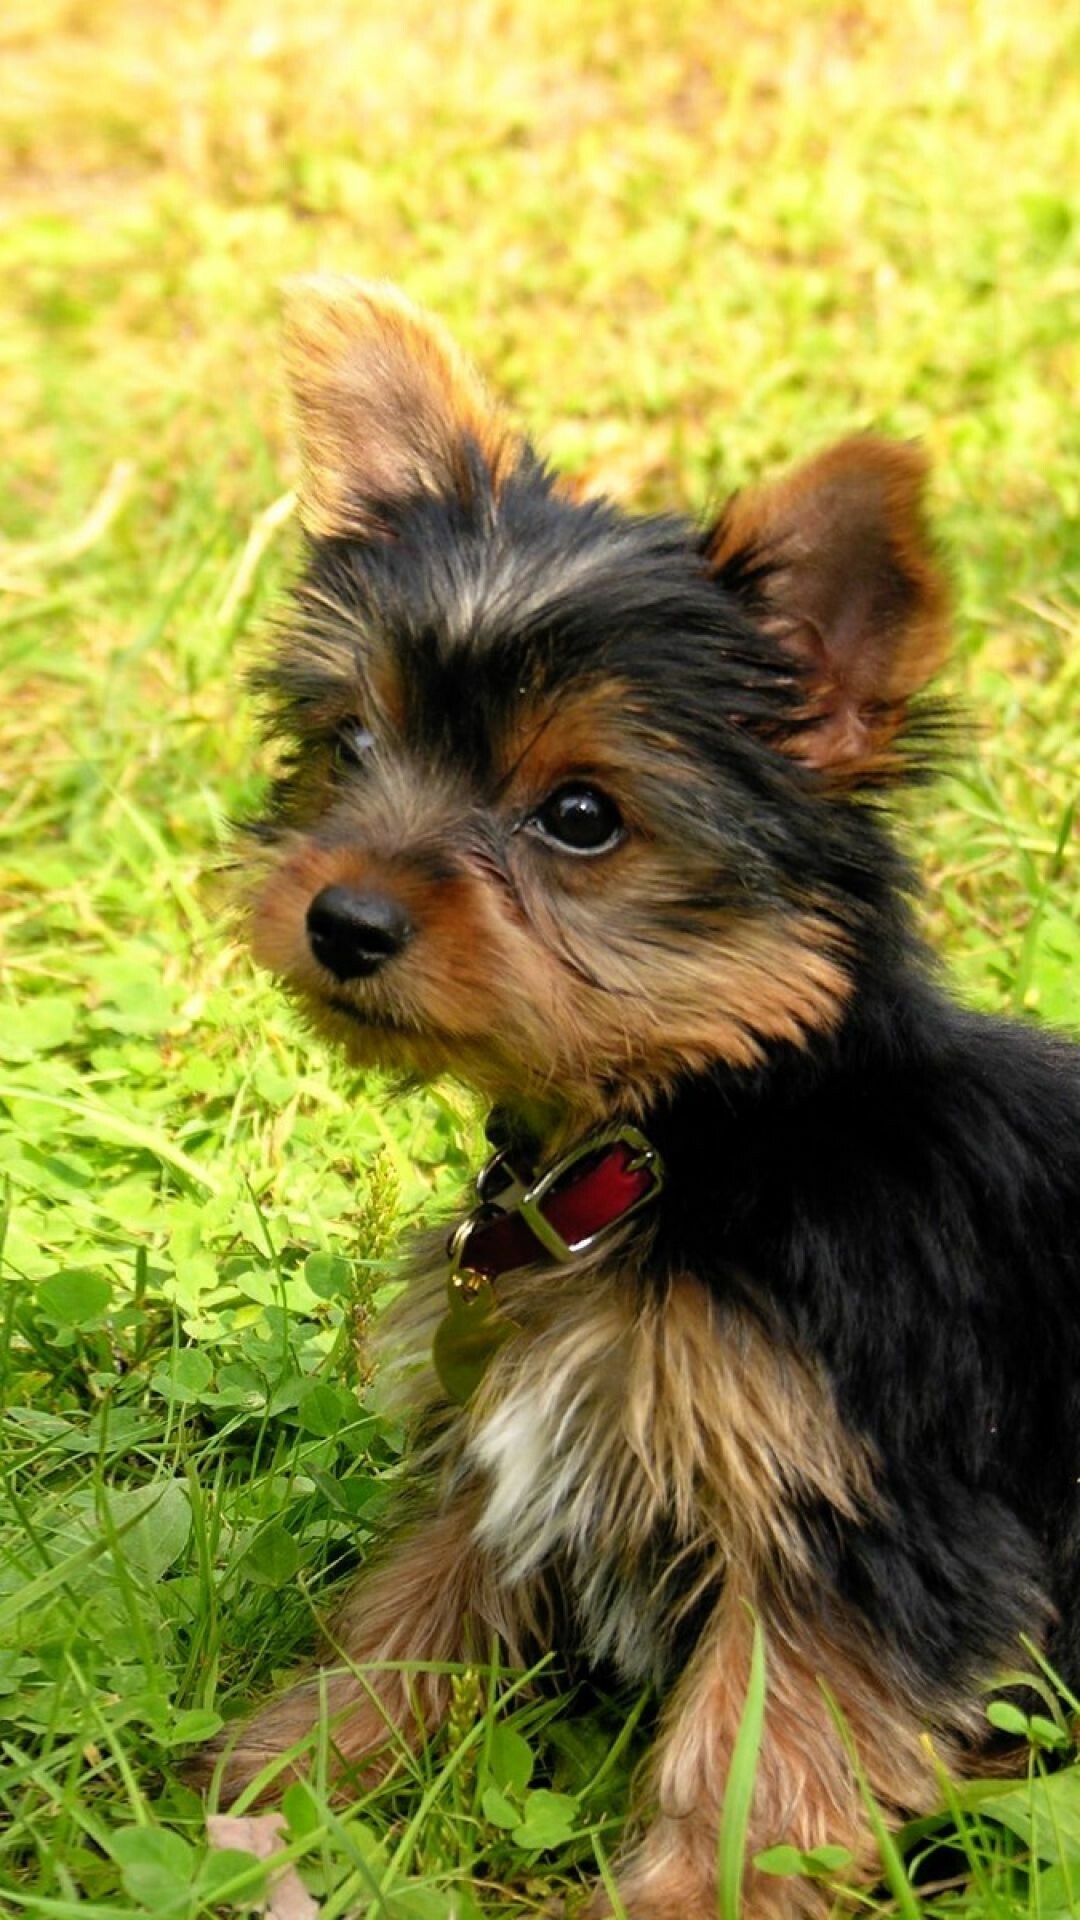 Yorkshire Terrier: Puppy, Baby dog, Grass, A spunky, smart, small dog. 1080x1920 Full HD Wallpaper.